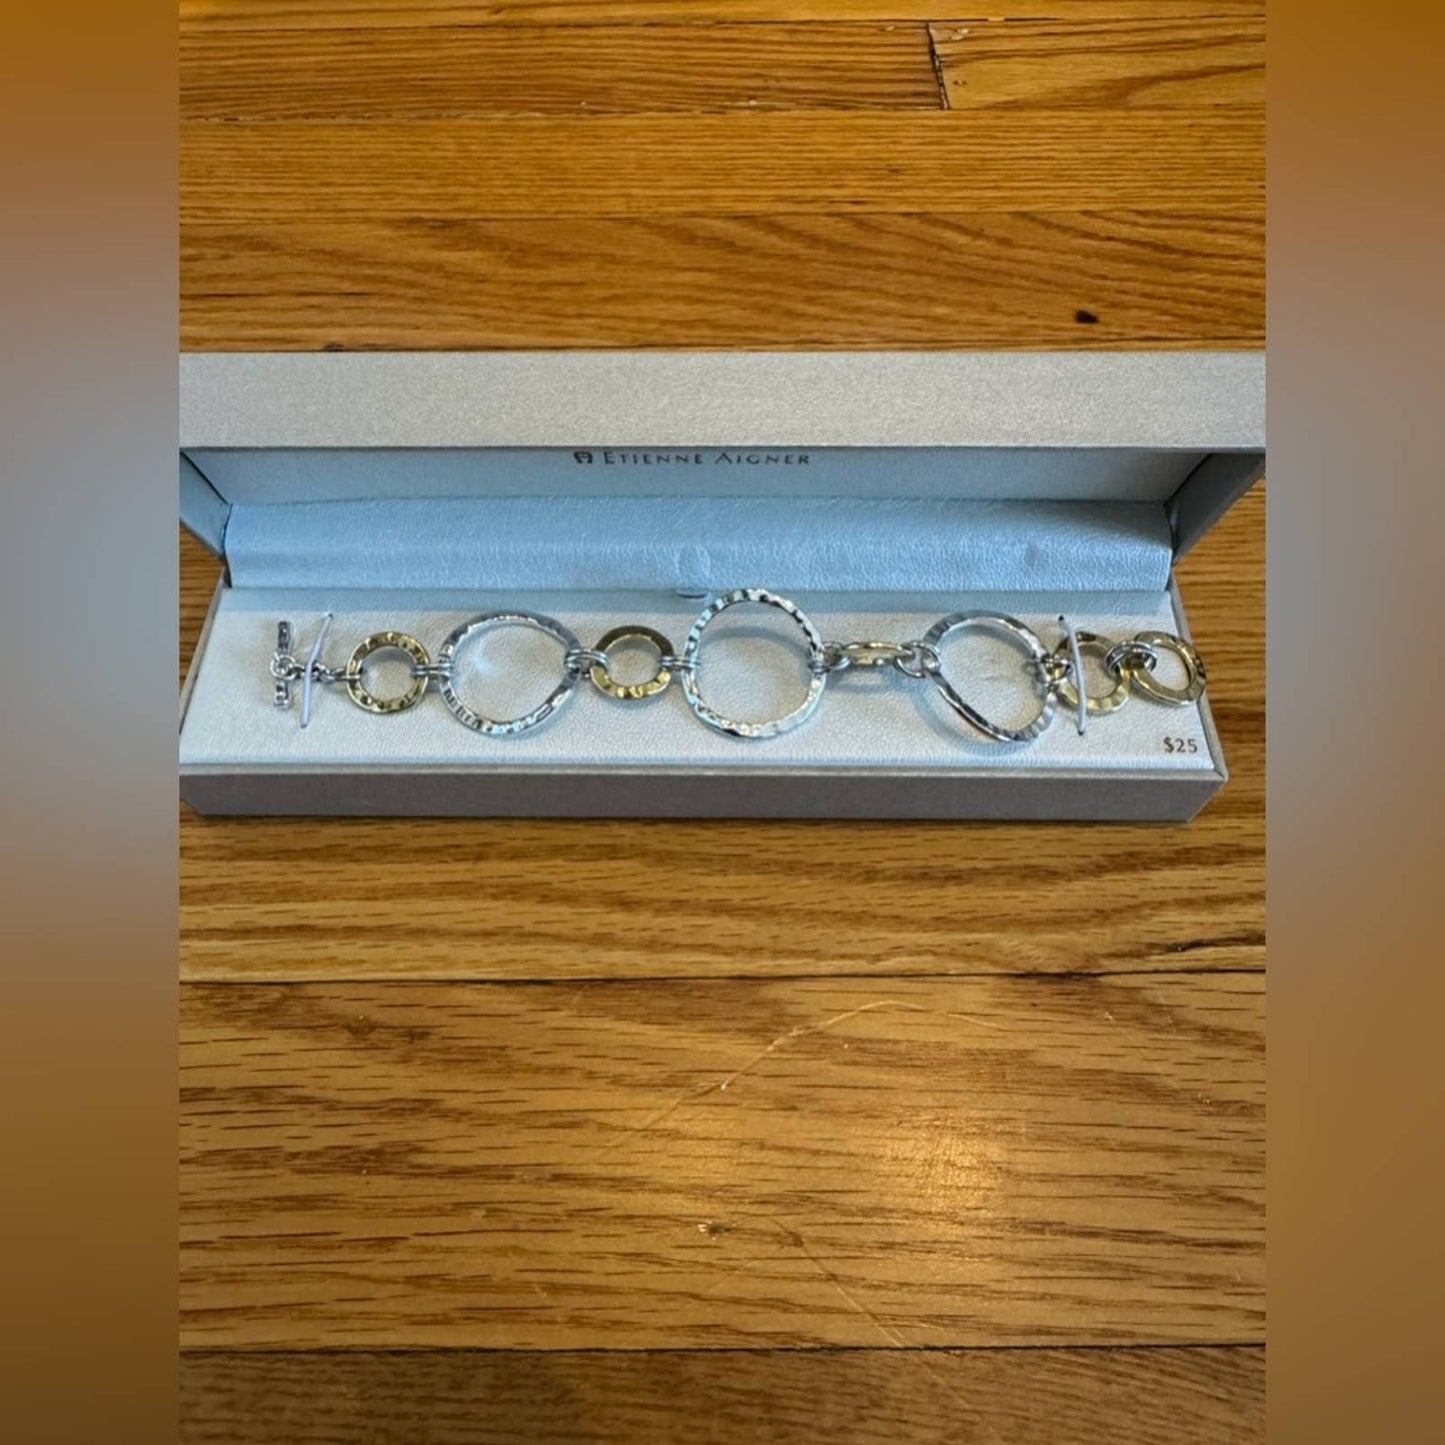 NWT Etienne Aigner Silver and Gold Tone Bracelet